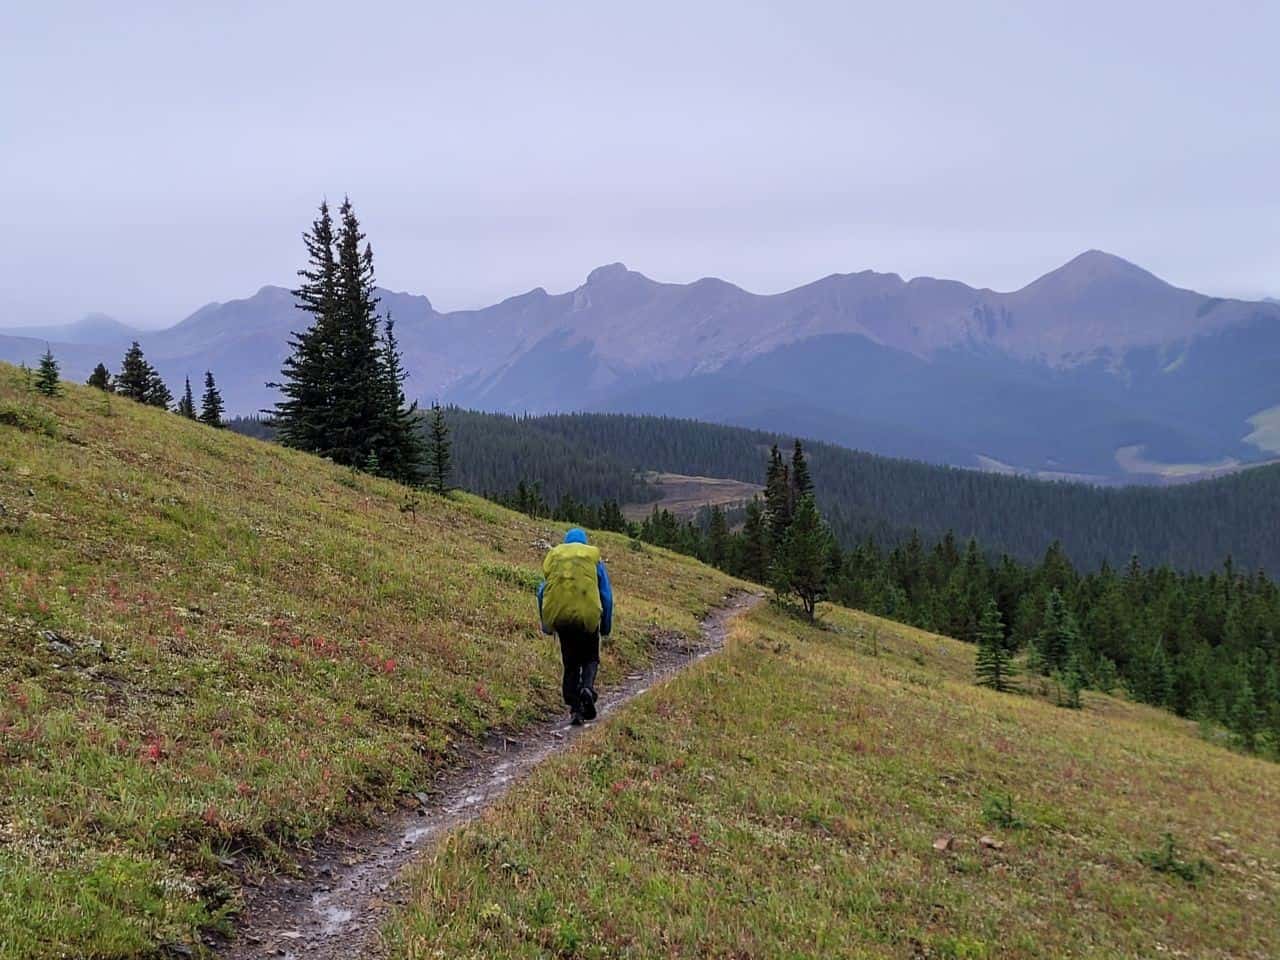 The Trans Canada Trail takes long-distance hikers and cyclists through the stunning mountain landscapes of Kananaskis Country, Alberta.